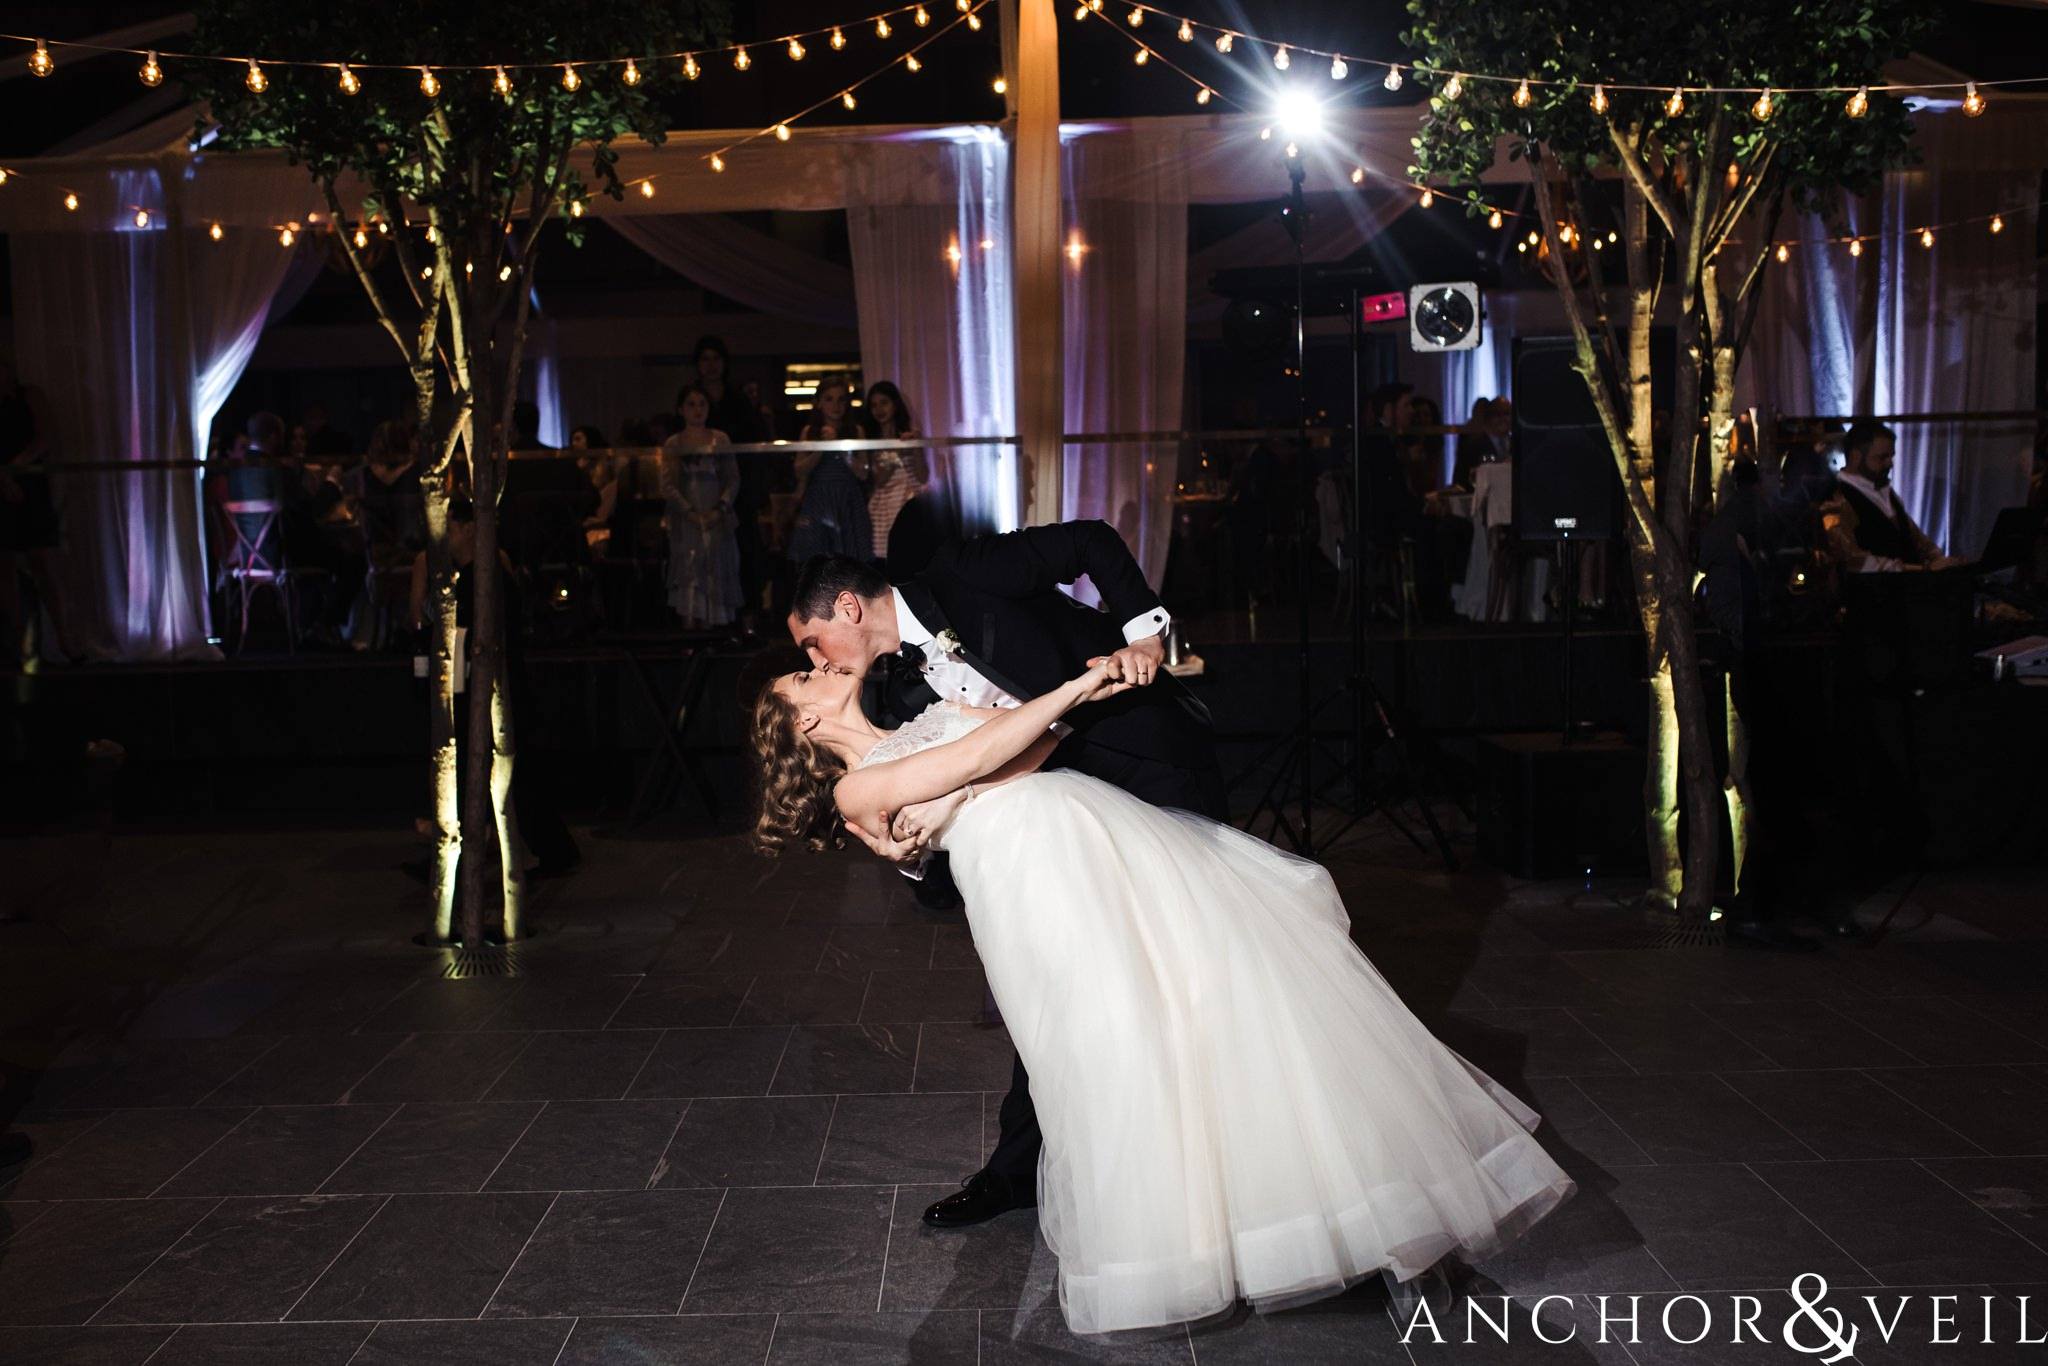 doing a dip during the reception during their ritz Carlton wedding in Uptown Charlotte NC